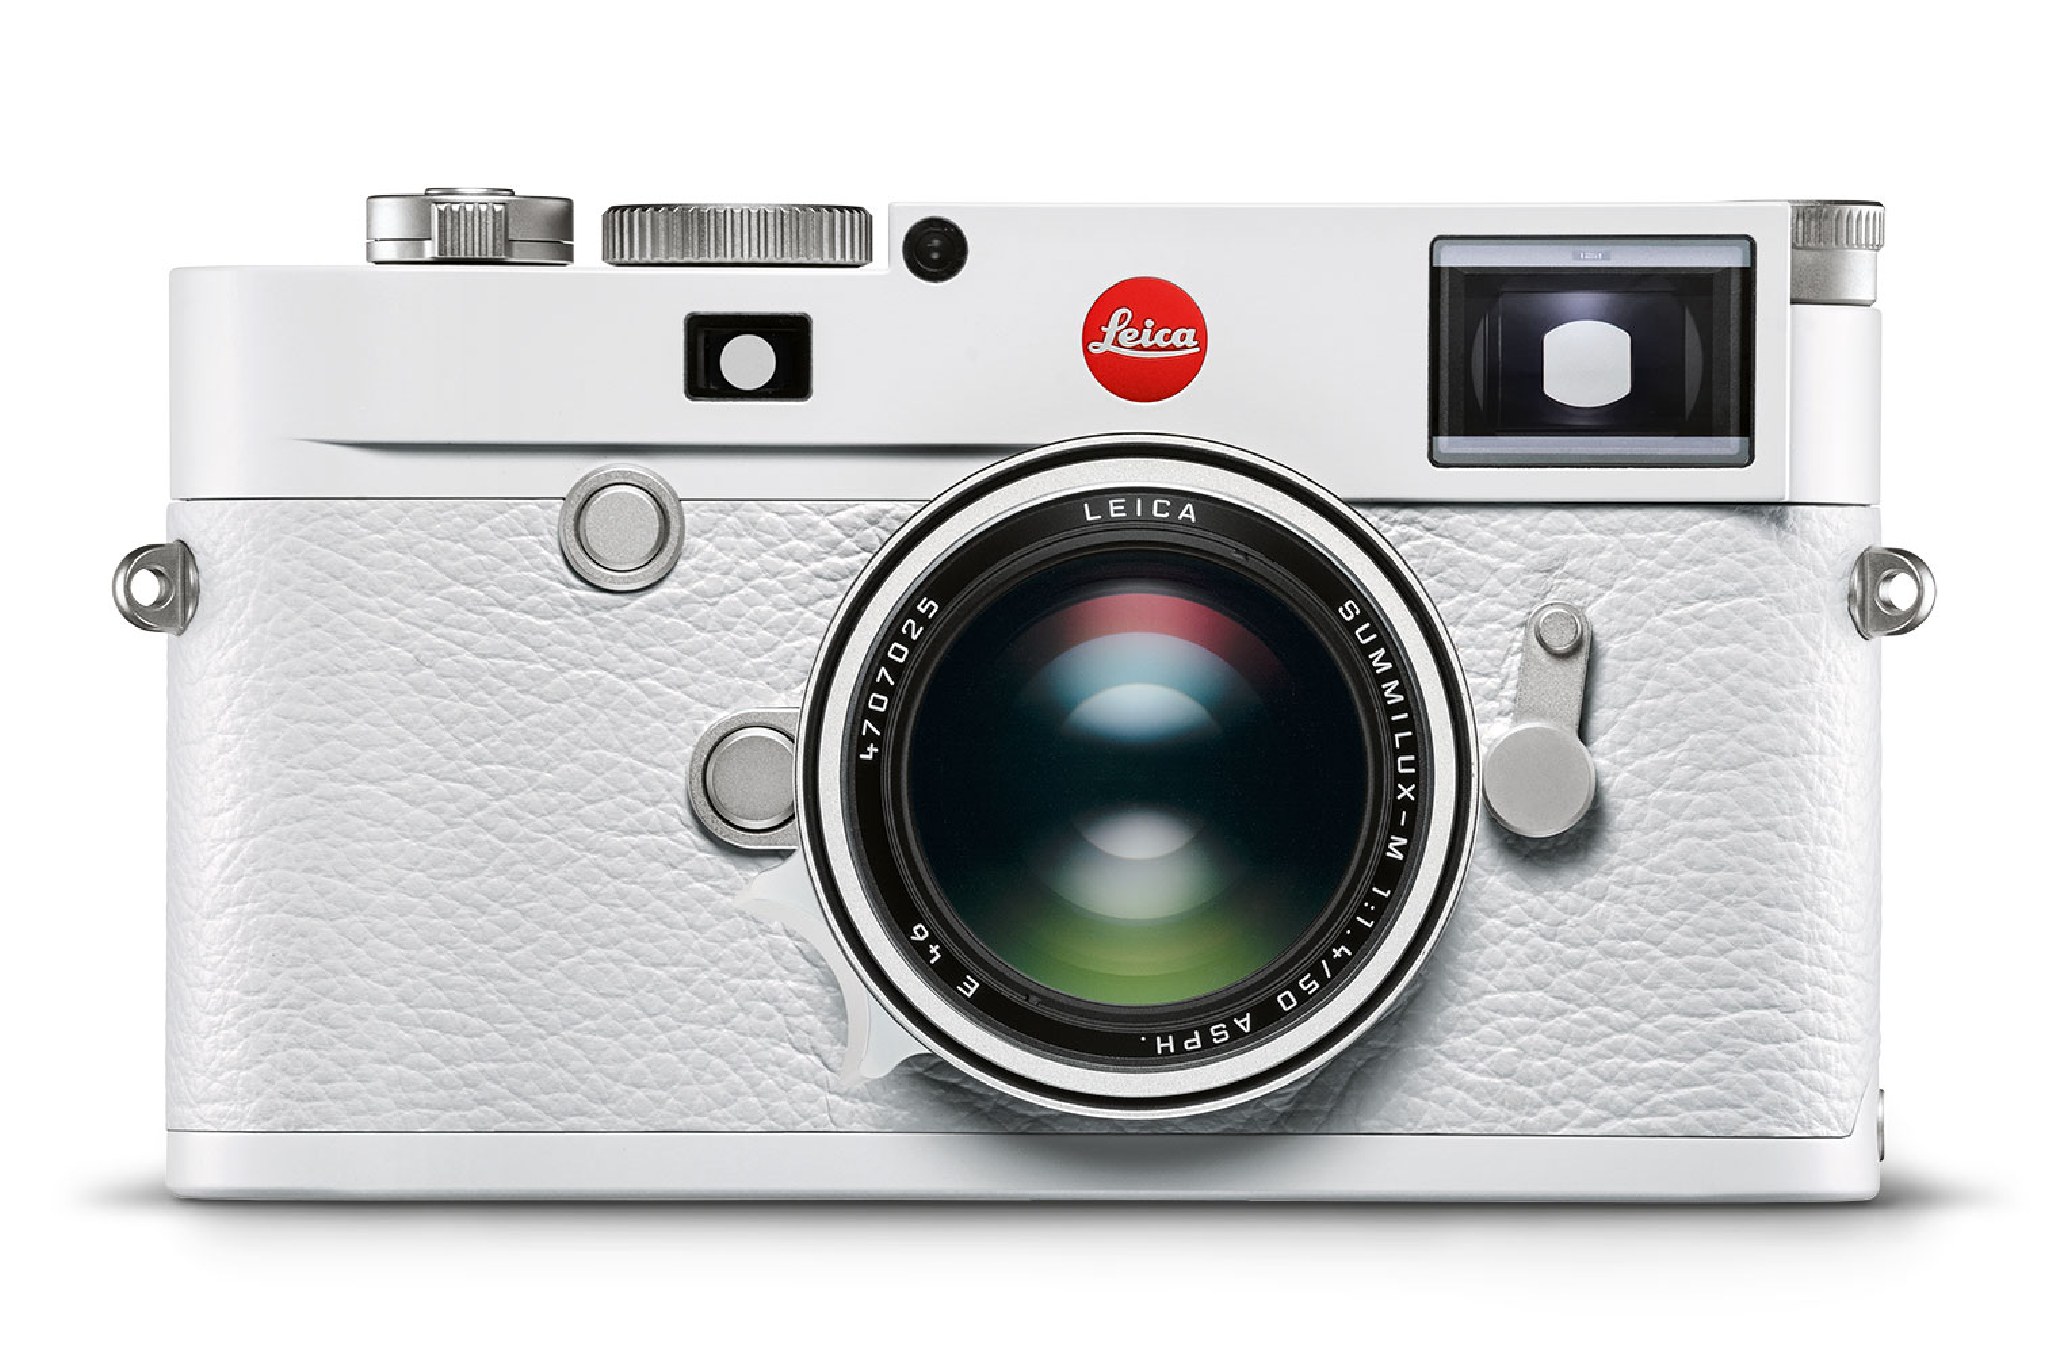 all-white-Leica-M10-limited-edition-camera-2.jpg